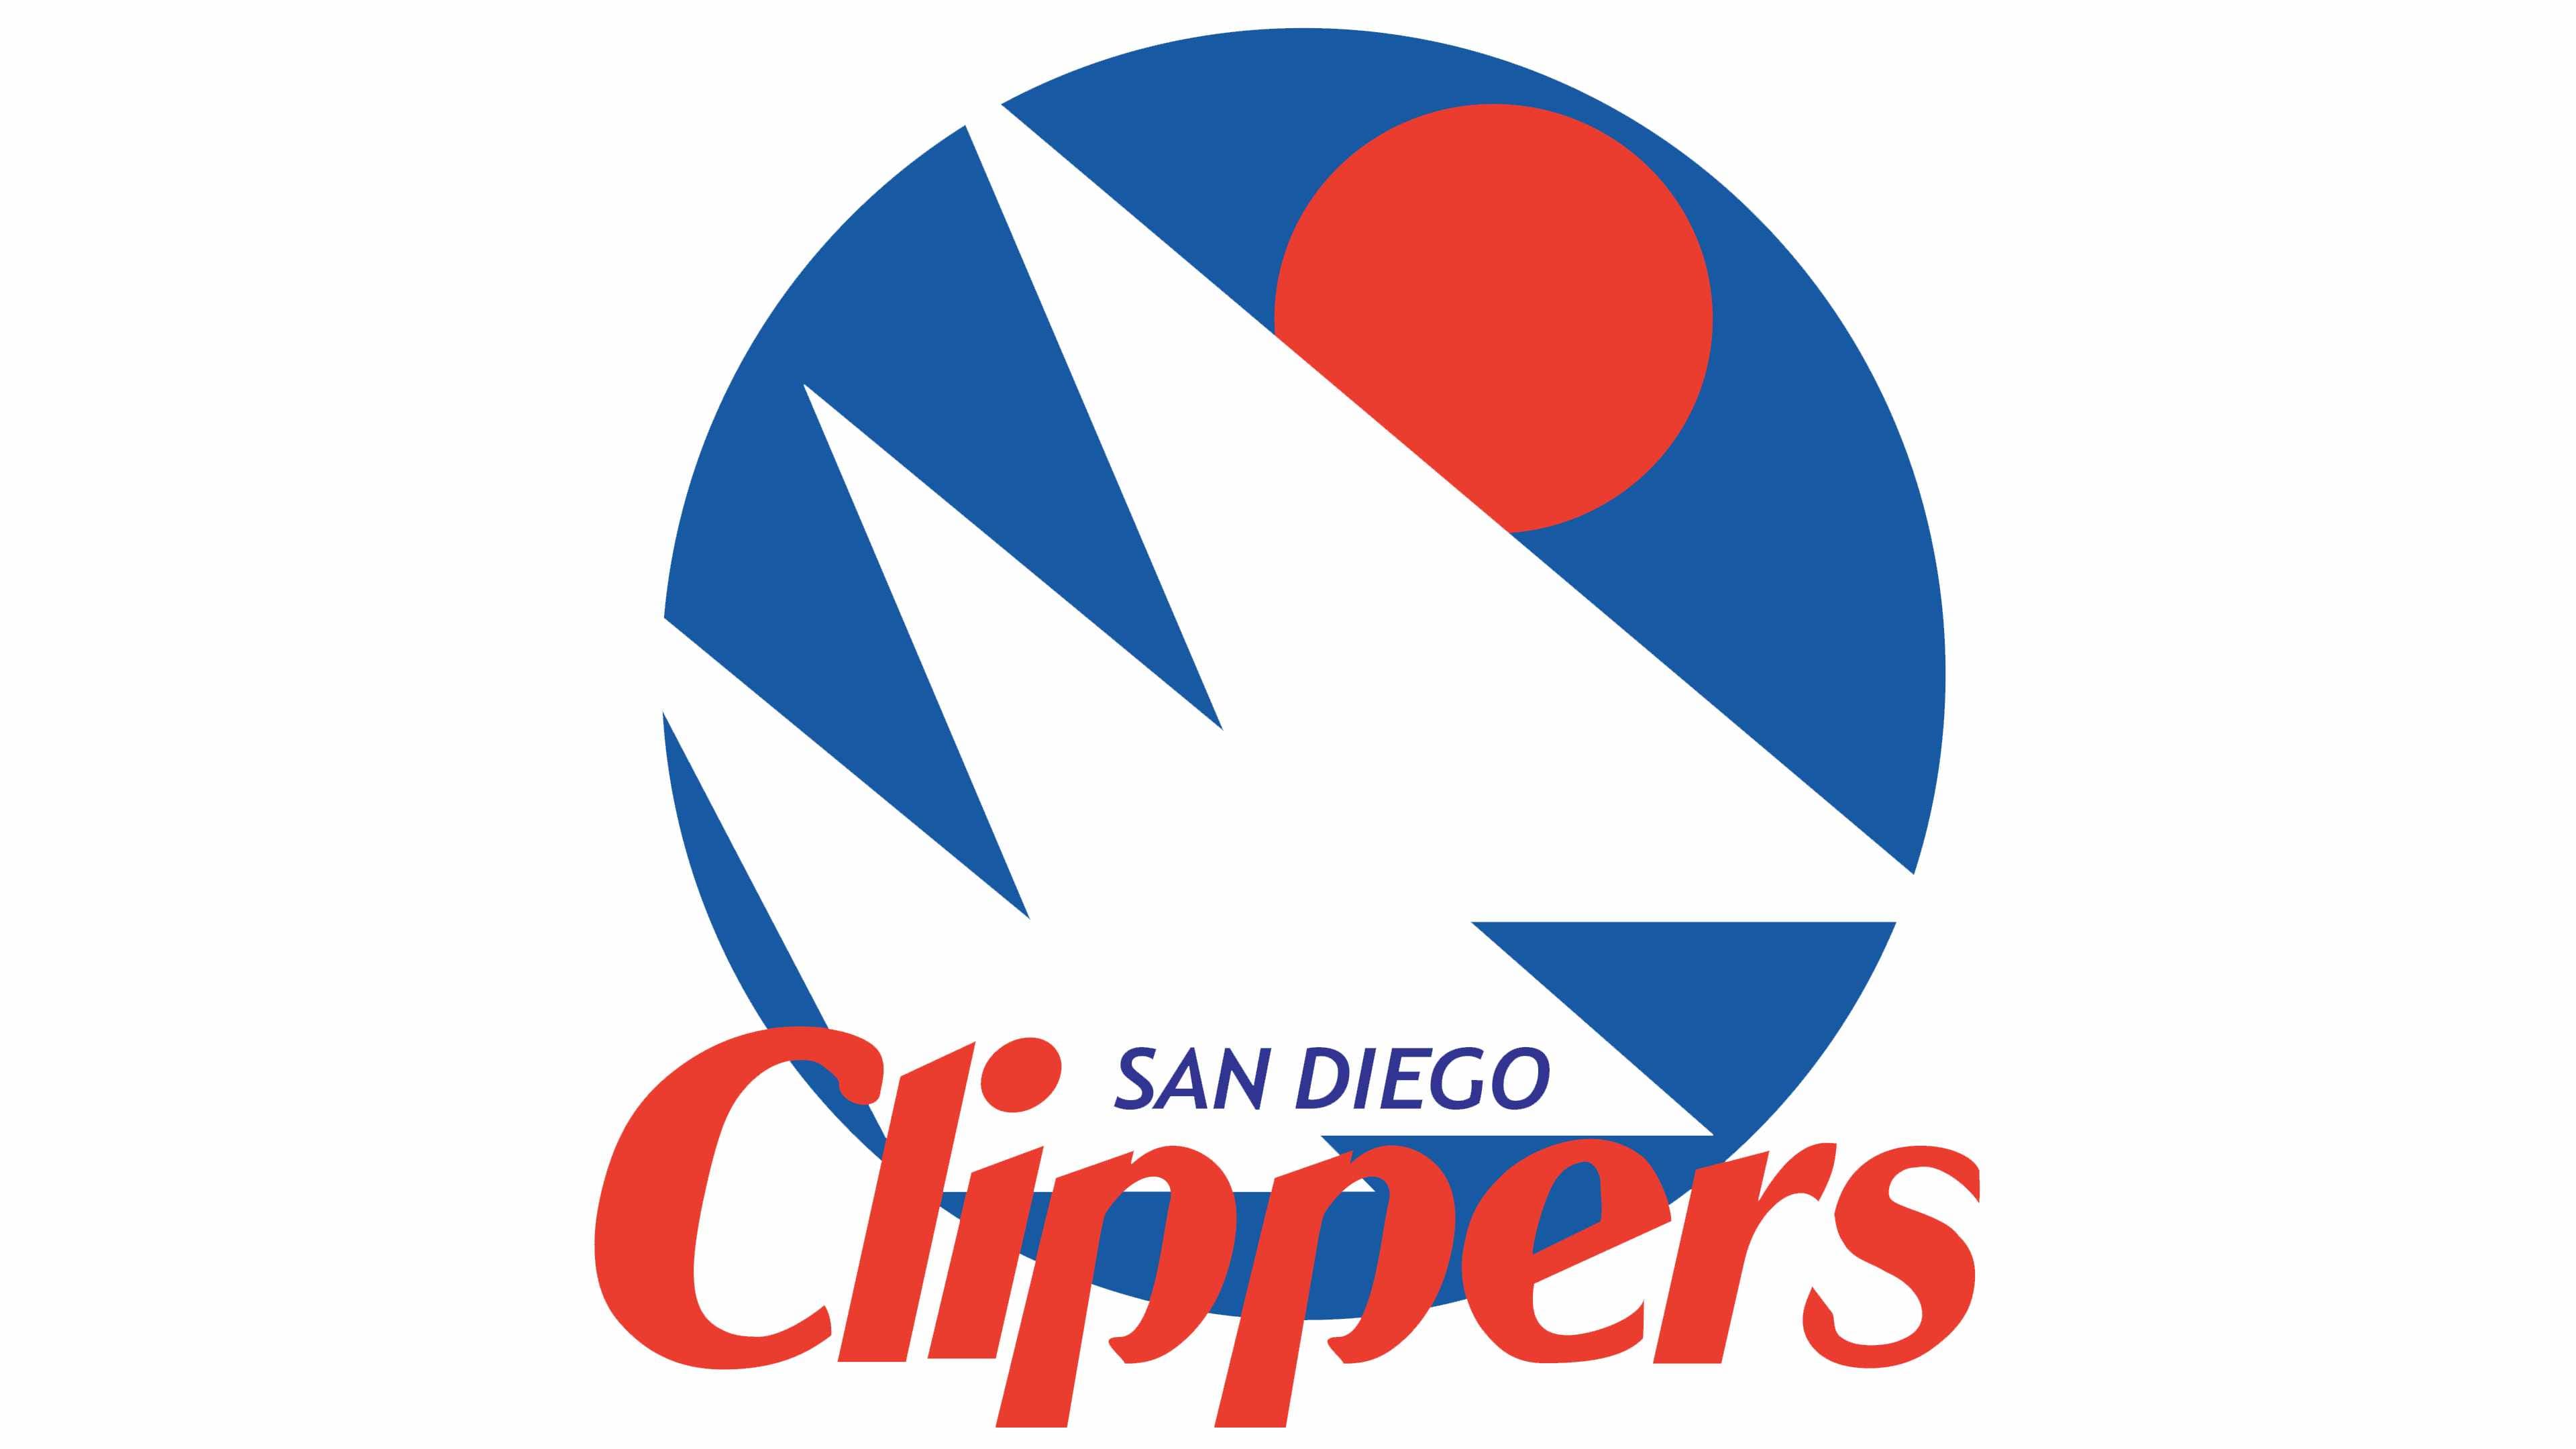 Los Angeles Clippers - Simple English Wikipedia, the free encyclopedia